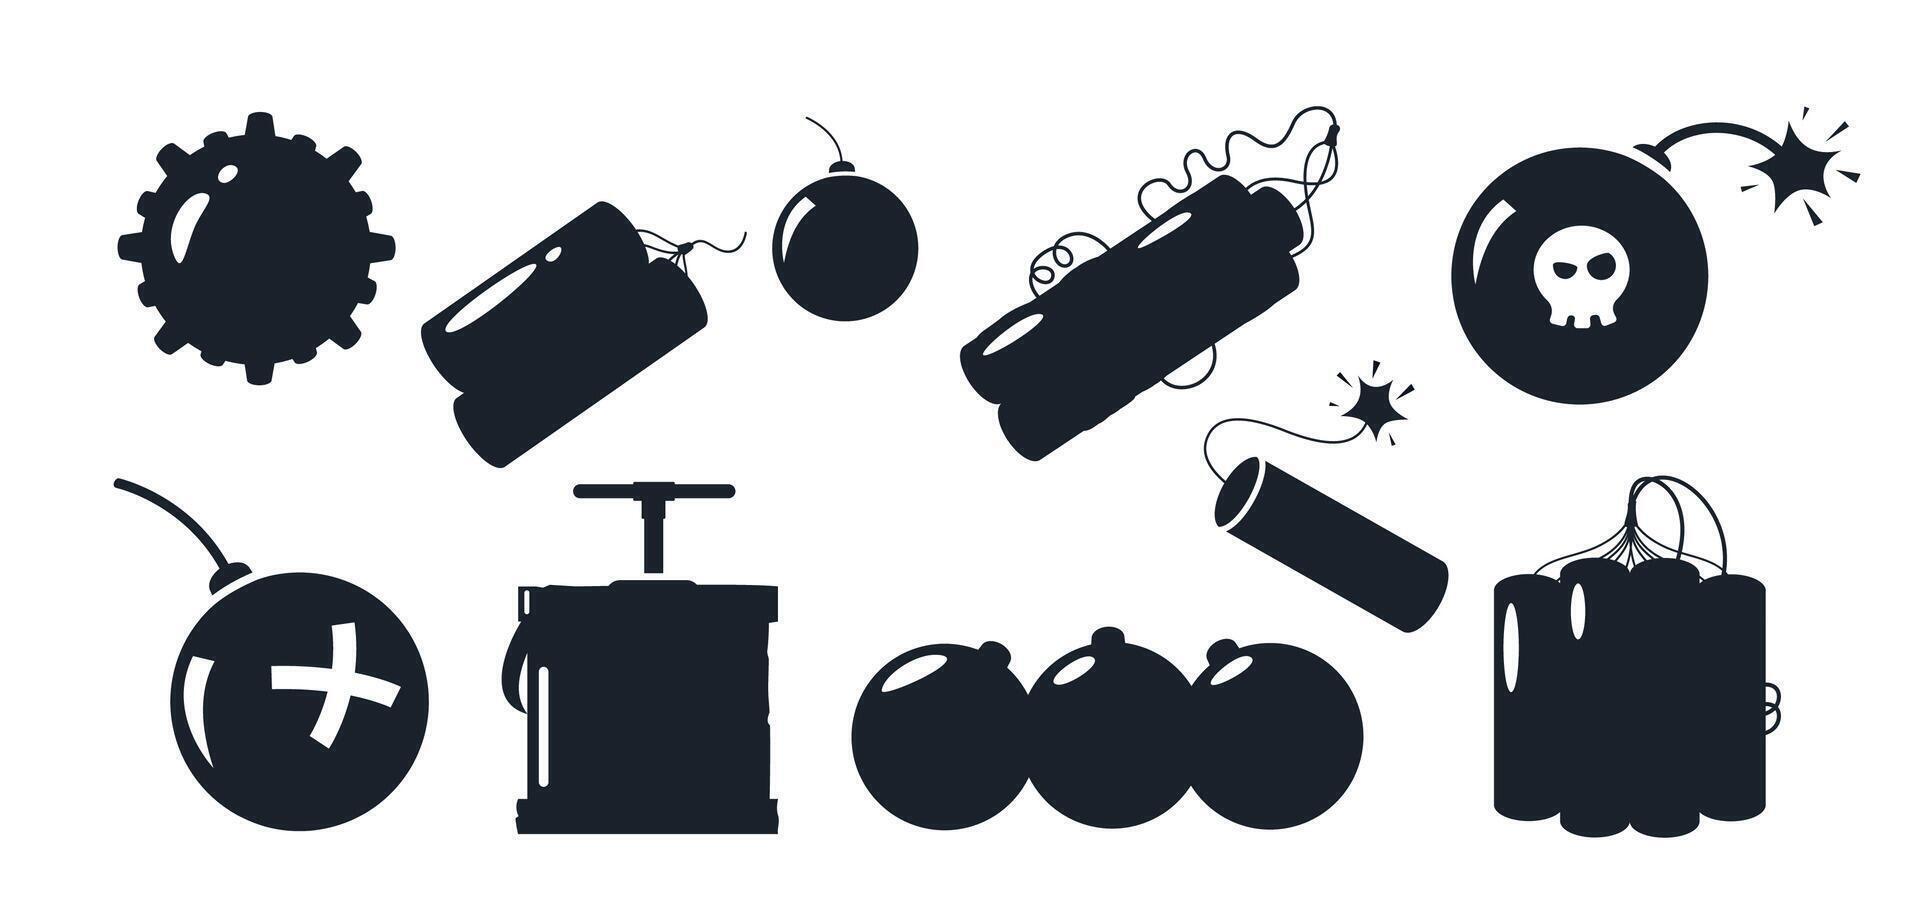 Bomb silhouette. Black explosive dynamite and grenade icons, military and civil danger symbols. Vector isolated collection